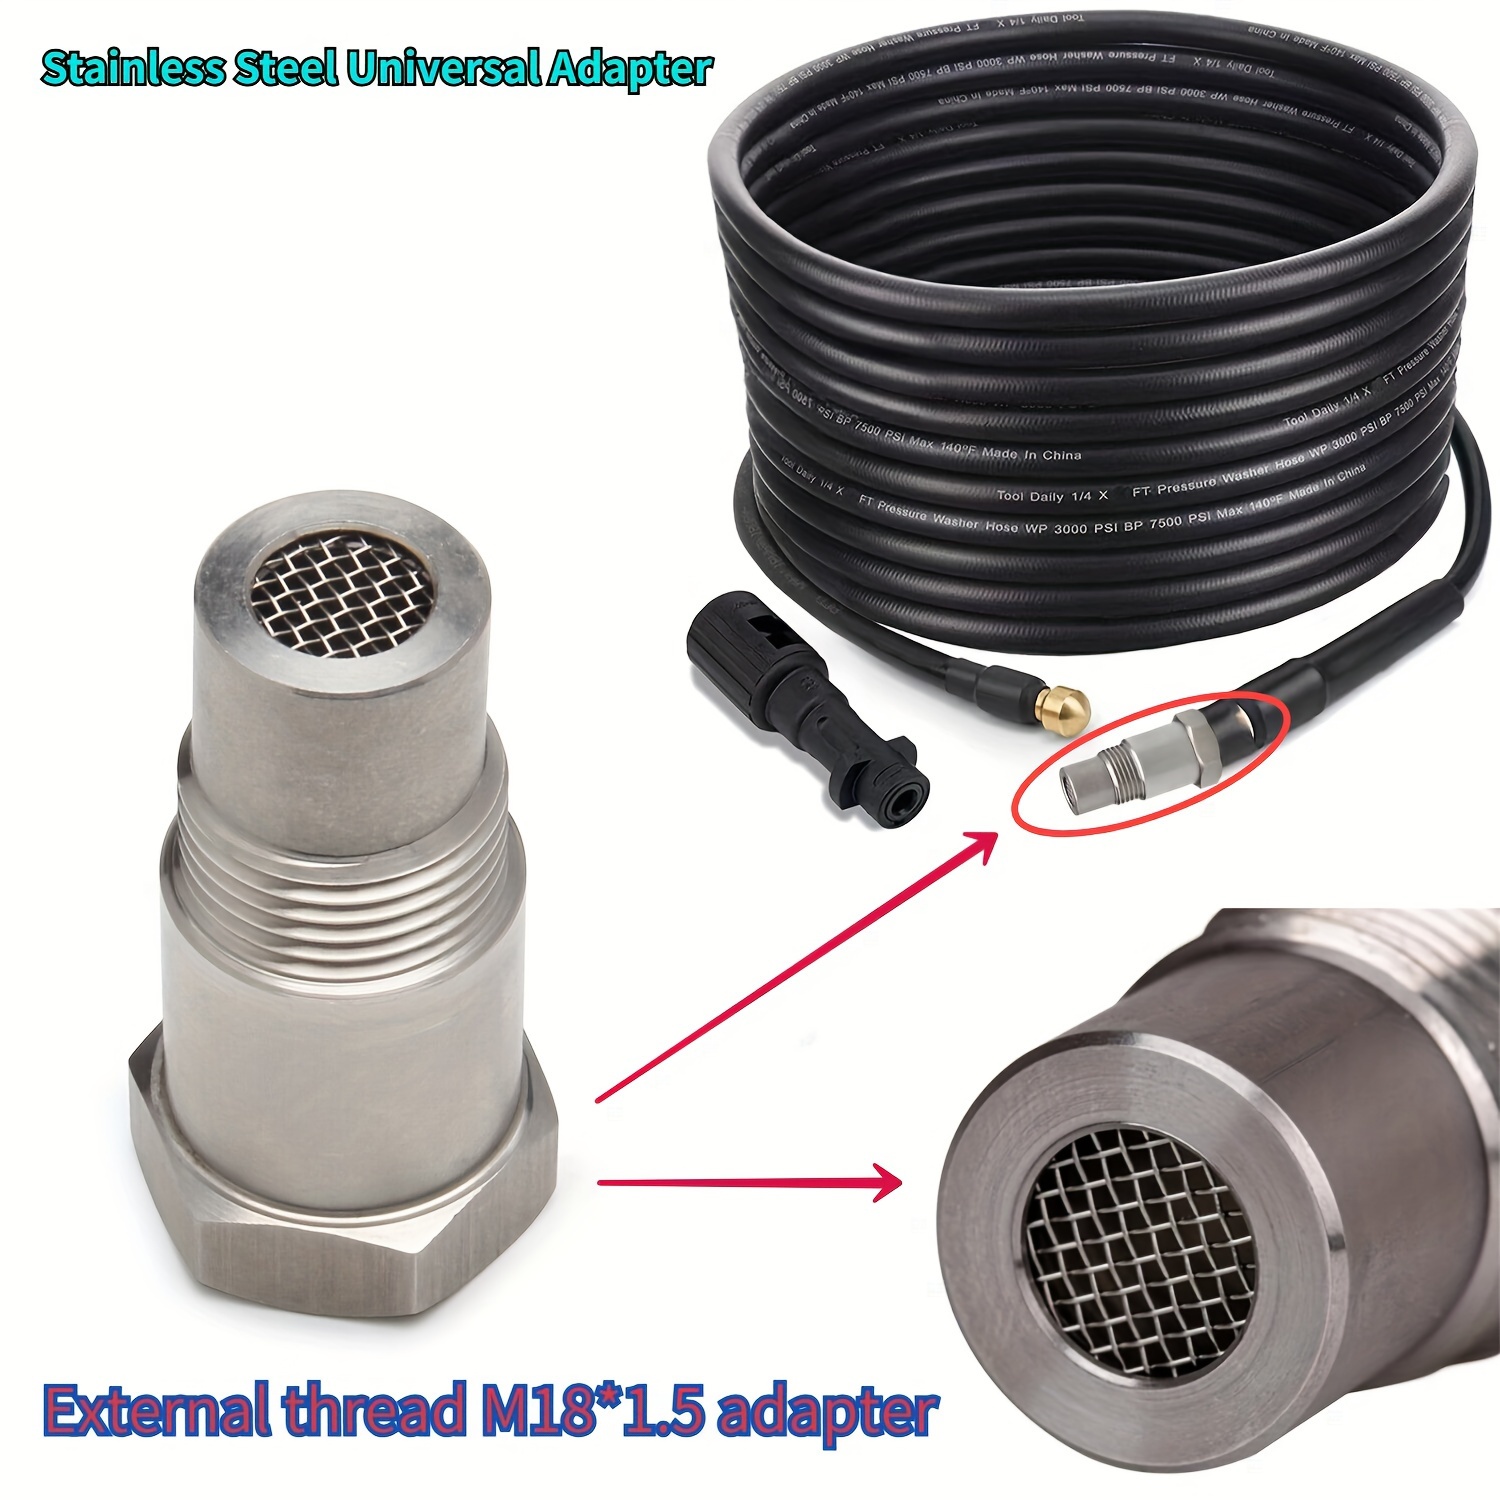 

1pc Universal Mesh Hose Nozzle, Extended Stainless Steel Mesh Filter, External Thread M18*1.5 Adapter